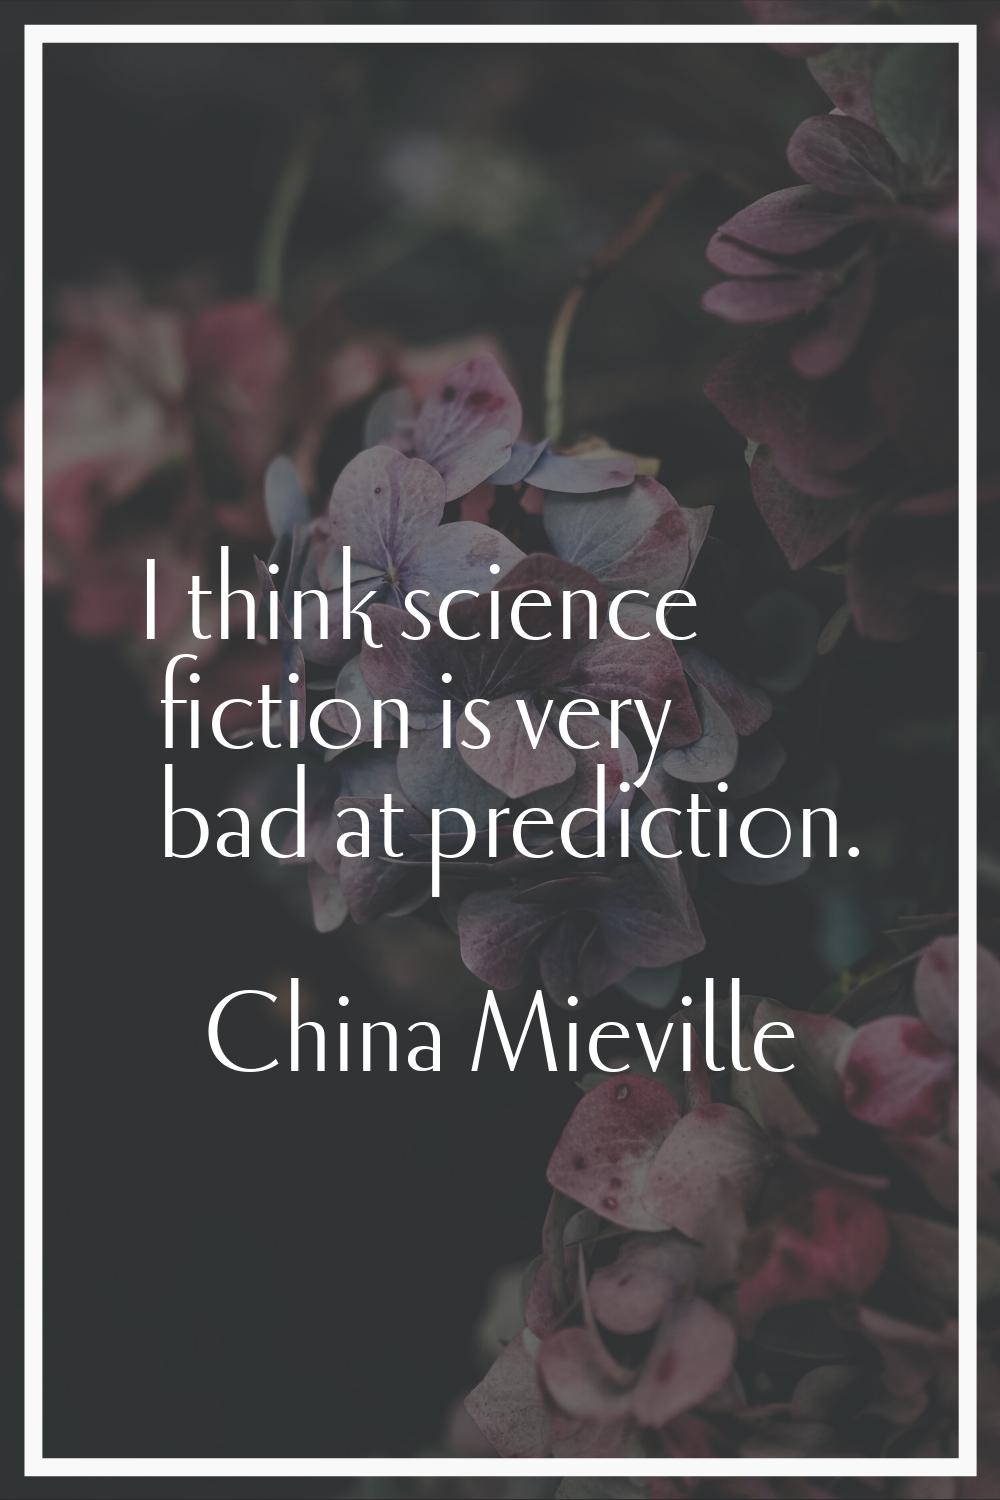 I think science fiction is very bad at prediction.